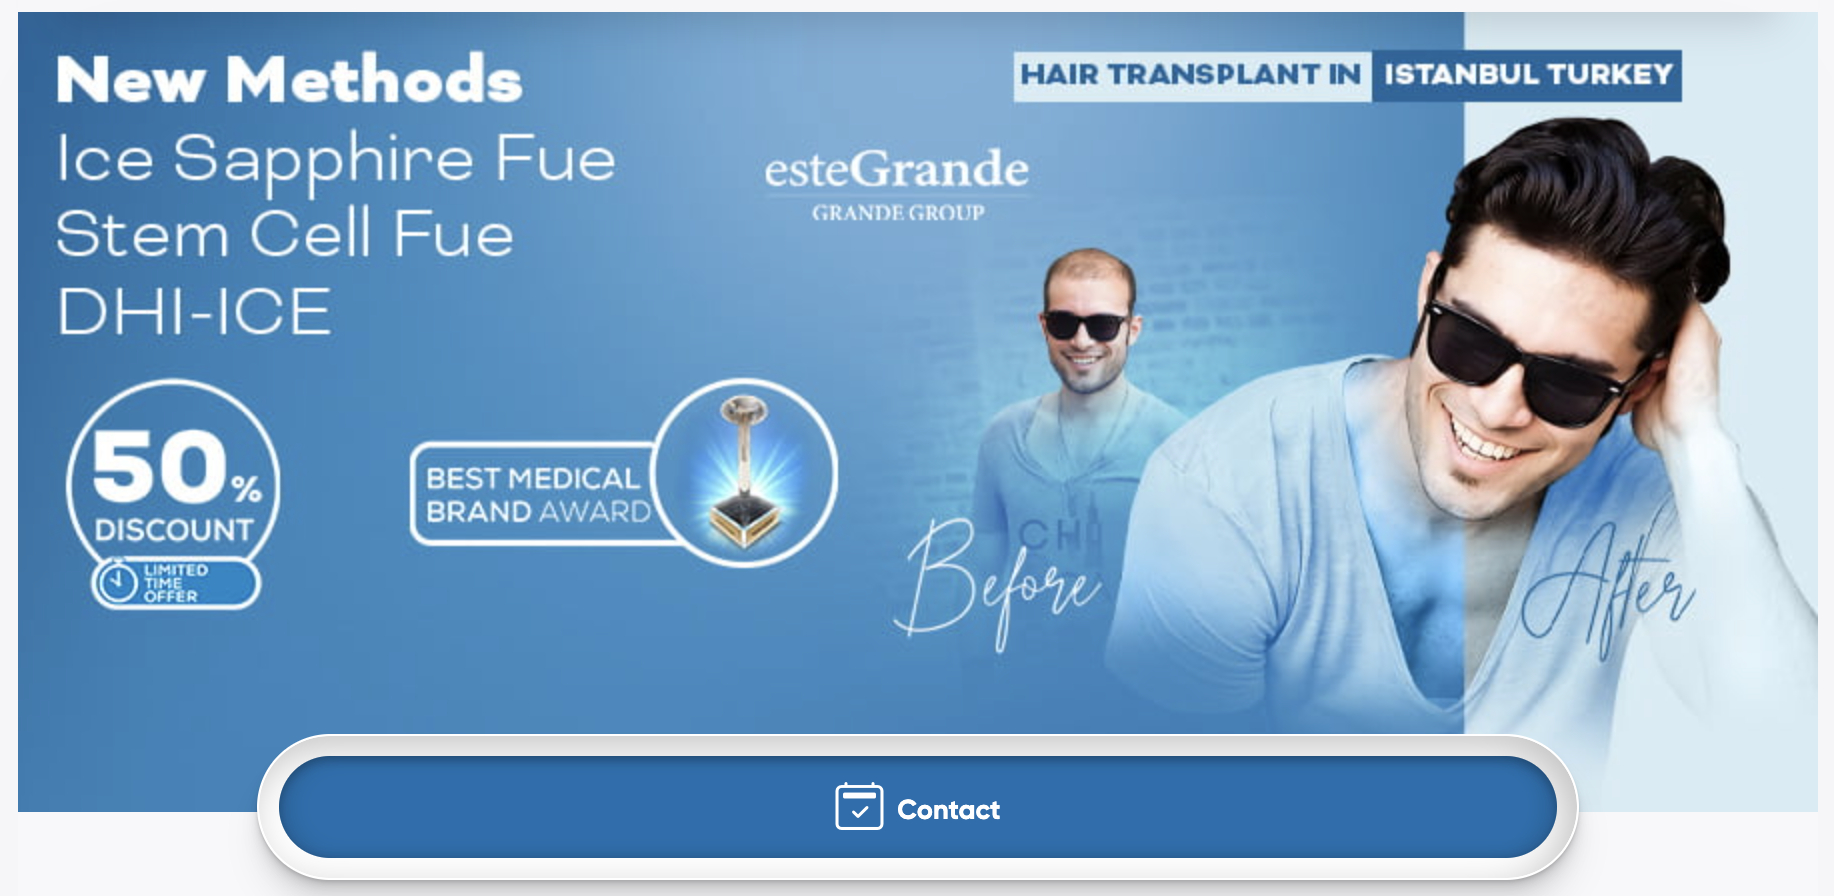 advertisement for a cheap deal on a hair transplant